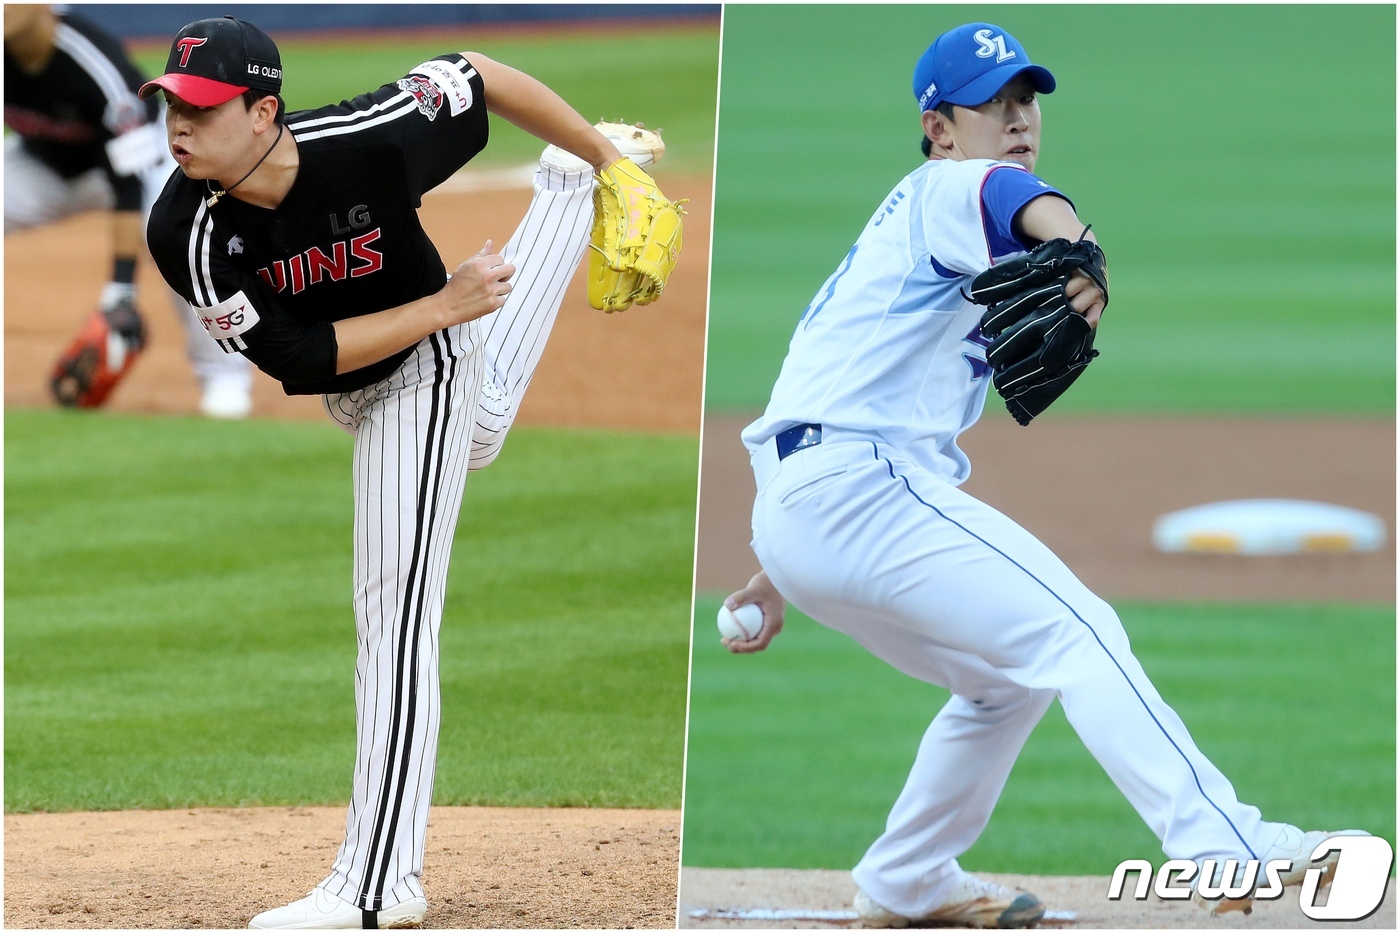 LG and Samsung Lions announced Lee Min-ho and Allow run Dong as Cole Hamels in the 11th game between the 2020 Shinhan Bank SOL KBO League team at Samsung Lions Lions Park in Daegu on the 26th.Both are rookie pitchers who have made their high school debut in The Graduate and this seasons professional debut.Lee Min-ho is a right-handed pitcher who has been named the first place by LG and has been named The Graduate.He has been able to secure a professional position this season with a sharp slider in a fastball approaching 150km. He is also considered a candidate for the Rookie of the Year with a 4-2 ERA and a 2.97 ERA in 11Kyonggi.He is still adjusting to the professional stage by climbing the mound as a teams fifth starter agent alternately with Chung Chan-heon.Allow run Dong, a former Yugoshi, was named by the Samsung Lions in the second round of the rookie draft.On May 28, he won the victory against Lotte Mart Giants with five scoreless innings in his debut match, and on June 3, LG won three innings in five innings. He became the main character of the record.However, he has not added a victory since then and is 2-1 with a 5.13 ERA in 7Kyonggi this season.The two pitchers, who ate a meal last year in the youth team, play for the first time in the professional.Lee Min-ho, who challenges 3Kyonggi to win consecutive games, can not back down all right run Dong who will take the first mound in a long time.Especially, as a rookie of the same age, pride is also hanging.It is also the Kyonggi, who is on the mound in great responsibility. LG has lost three consecutive games and has fallen to fourth place.The Samsung Lions, who are in eighth place, should also create a rebound atmosphere after the momentum of victory the day before.The role of Cole Hamels Lee Min-ho, Allow run Dong is important.Its a rare sight for high school freshman pitchers to start in the same Kyonggi: An interesting Kyonggi, whether to see it once a year.Since 2010, it is the fourth high school graduate starter.On September 8 last year, Lotte Mart Giants Seo-joon One and Hanhwa Eagles Kim Yi-hwan played in Daejeon.Seo-joon won the game with five scoreless innings and a victory pitcher, and Kim Yi-hwan lost two runs in 323 innings.On September 20, 2018, Samsung Lions Yang Chang-seop and Nexen (now Help) Heroes Ahn Woo-jin confronted each other at Gocheok Dome.The result was Ahn Woo-jins victory, which was a victory in five innings. Yang Chang-seop was a loser even after he succeeded in quality start with three runs in 623 innings.To find that previous record, it must be dated back to 2010: the Doosan Bears and the Kinghgi of Hanhwa in Daejeon on August 29, 2010.At the time, Doosan Lee Jae-hak (current NC) had three runs in five innings and Hanhwa Ahn Seung-min had three runs in 513 innings.There is a variable called typhoon in the confrontation between Lee Min-ho and Allow run Dong because rain is forecast in the southern part of the country due to the influence of typhoon Bobby in the north.If the confrontation is concluded, it will be an interesting Kyonggi enough to attract the attention of baseball fans.After 2010, we will face each other in the selection of new high school graduatesSeptember 8, 2019 DaejeonLotte Mart Seo-joon One (five scoreless innings win) vs Hanhwa Kim I-hwan (323 innings two runs lost) / Lotte Mart 12 - 0 win20 September 2018 GocheokSamsung Lions Yang Chang-seop (623 innings three runs lost) vs Nexen Ahn Woo-jin (5 innings without a run / Nexen 3 - 2 winsAugust 29, 2010 DaejeonDoosan Lee Jae-hak (5 innings and three runs) vs Hanhwa Ahn Seung-min (513 innings, three runs, two earned) / Doosan 9 - three winsLast year, Lotte Mart Seo-joon One - Hanhwa Kim Yi-hwan